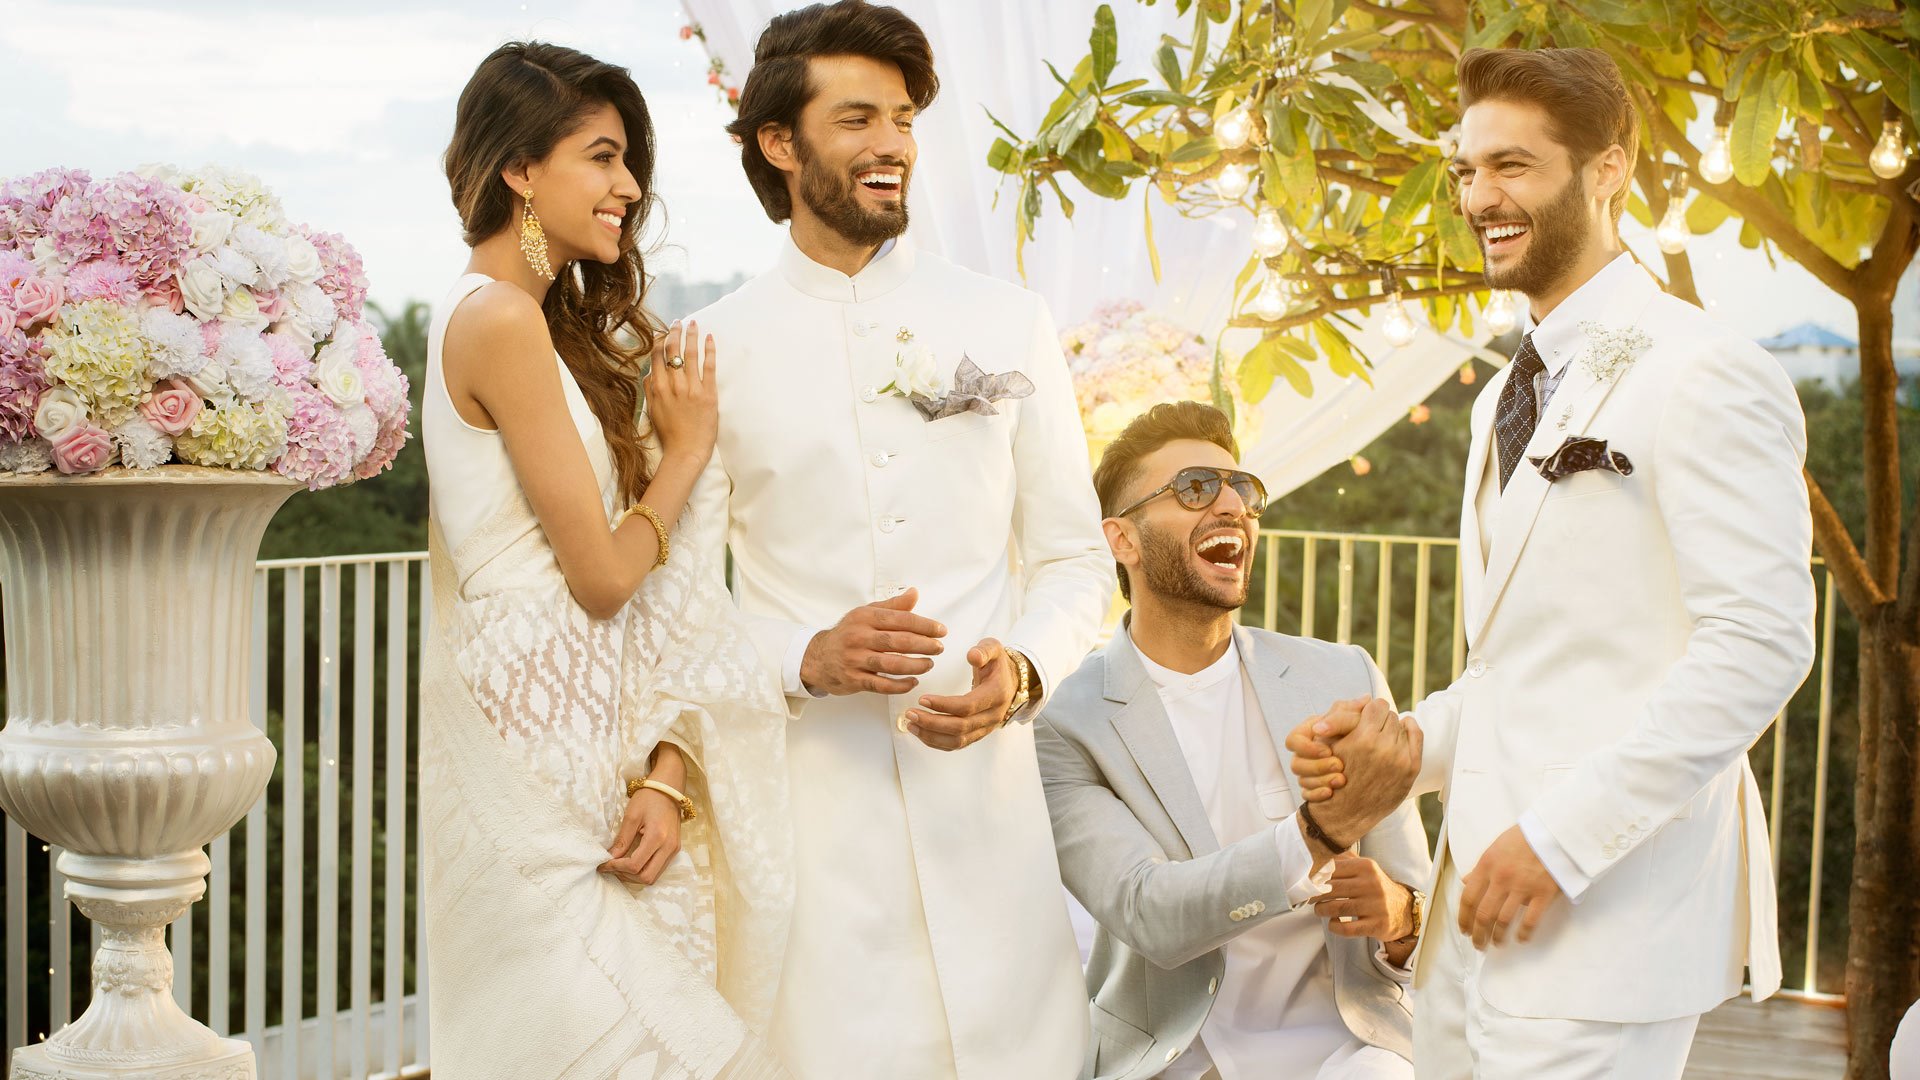 “Bring your stylish self forward because there's nothing more stylish than you. Here's your ultimate style guide to follow.”

#StayTrueStayNew #TheArvindStore #FashionForMen #WeddingSeason #WeddingCollection #BestMan #Ceremonial GQ India